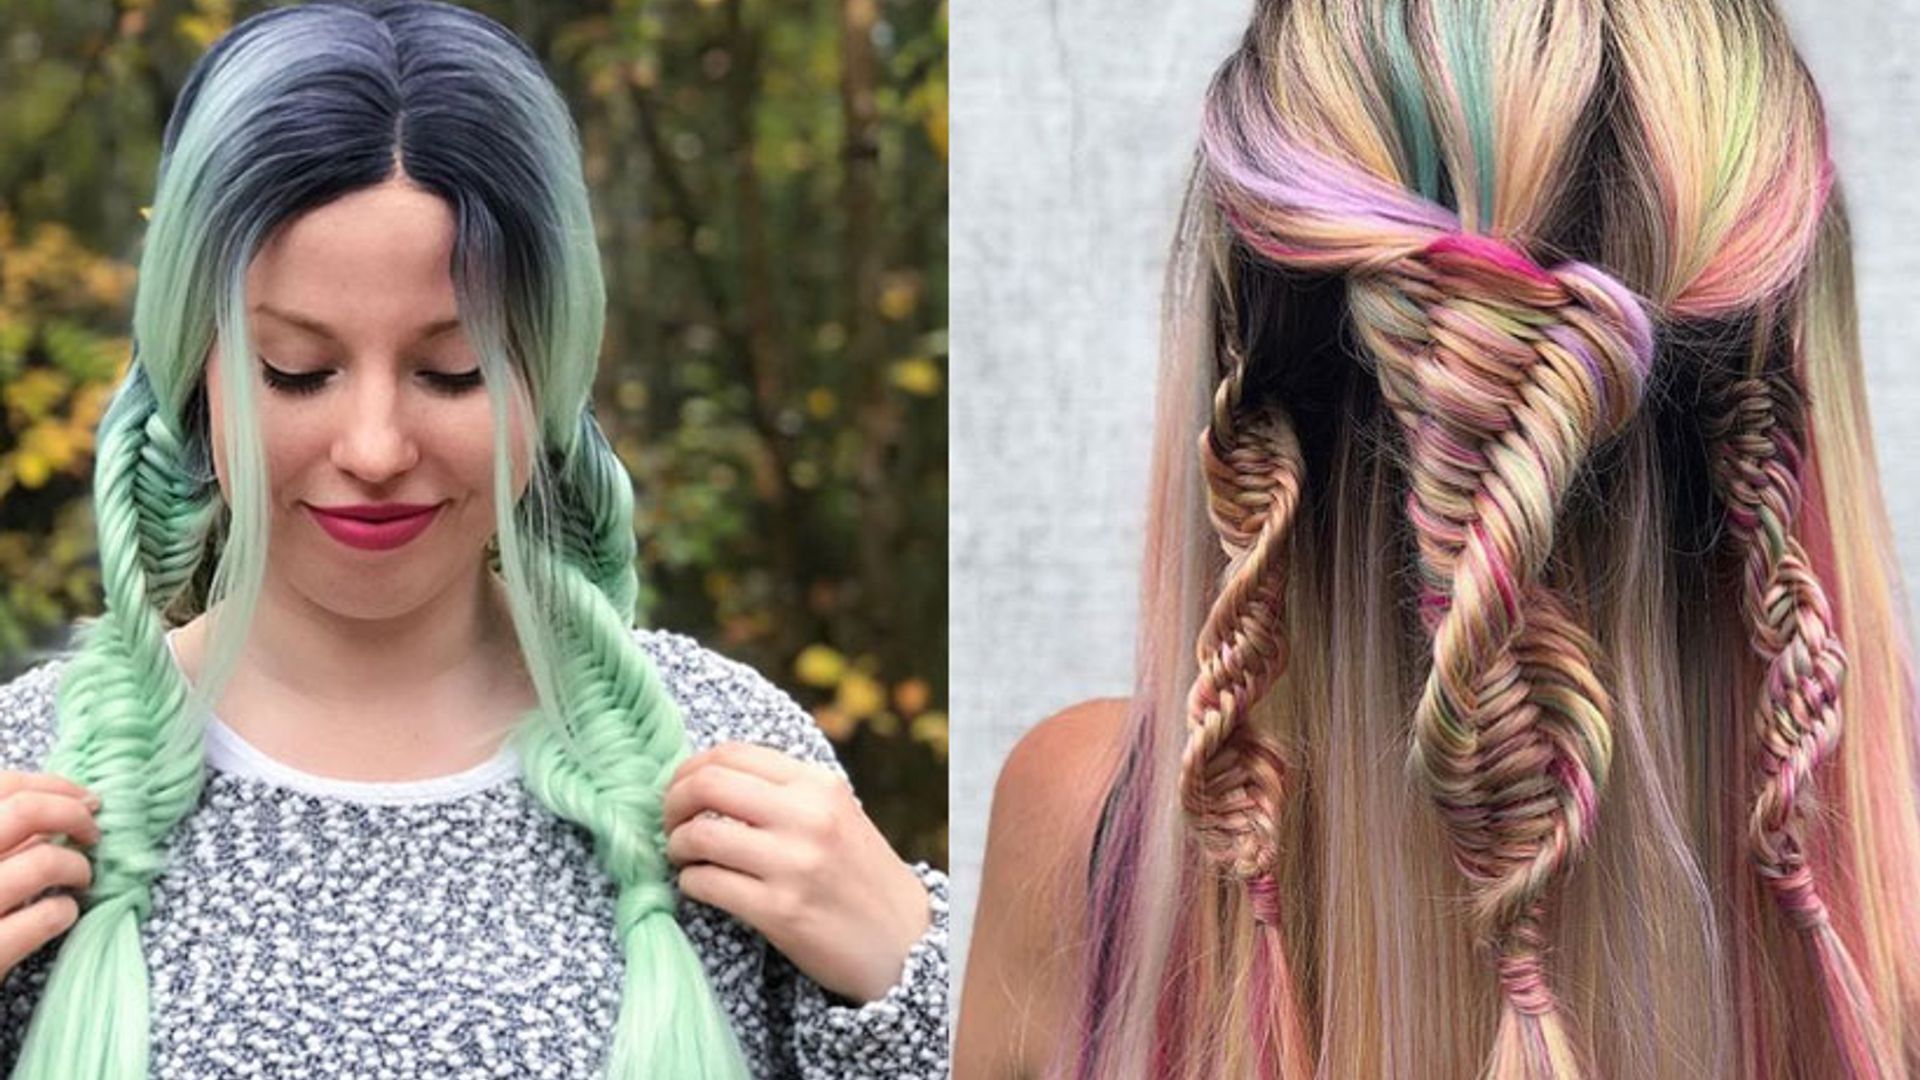 DNA braids are the latest hair trend sweeping your Instagram feed | HELLO!